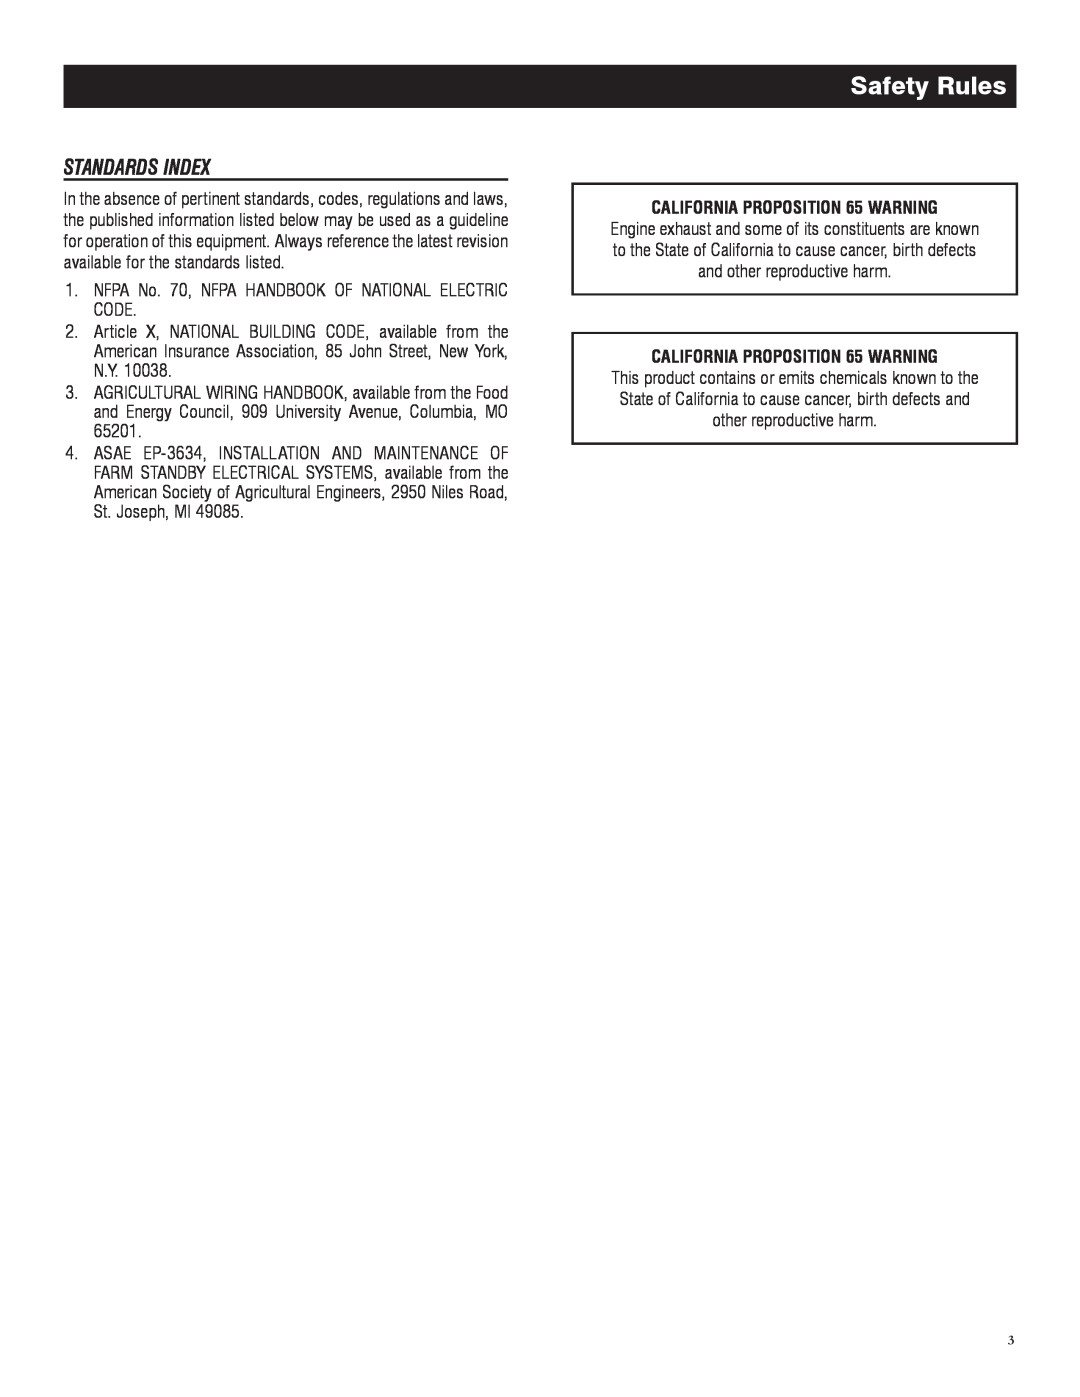 Generac 5982R, 005982-0 owner manual Standards Index, Safety Rules, CALIFORNIA PROPOSITION 65 WARNING 